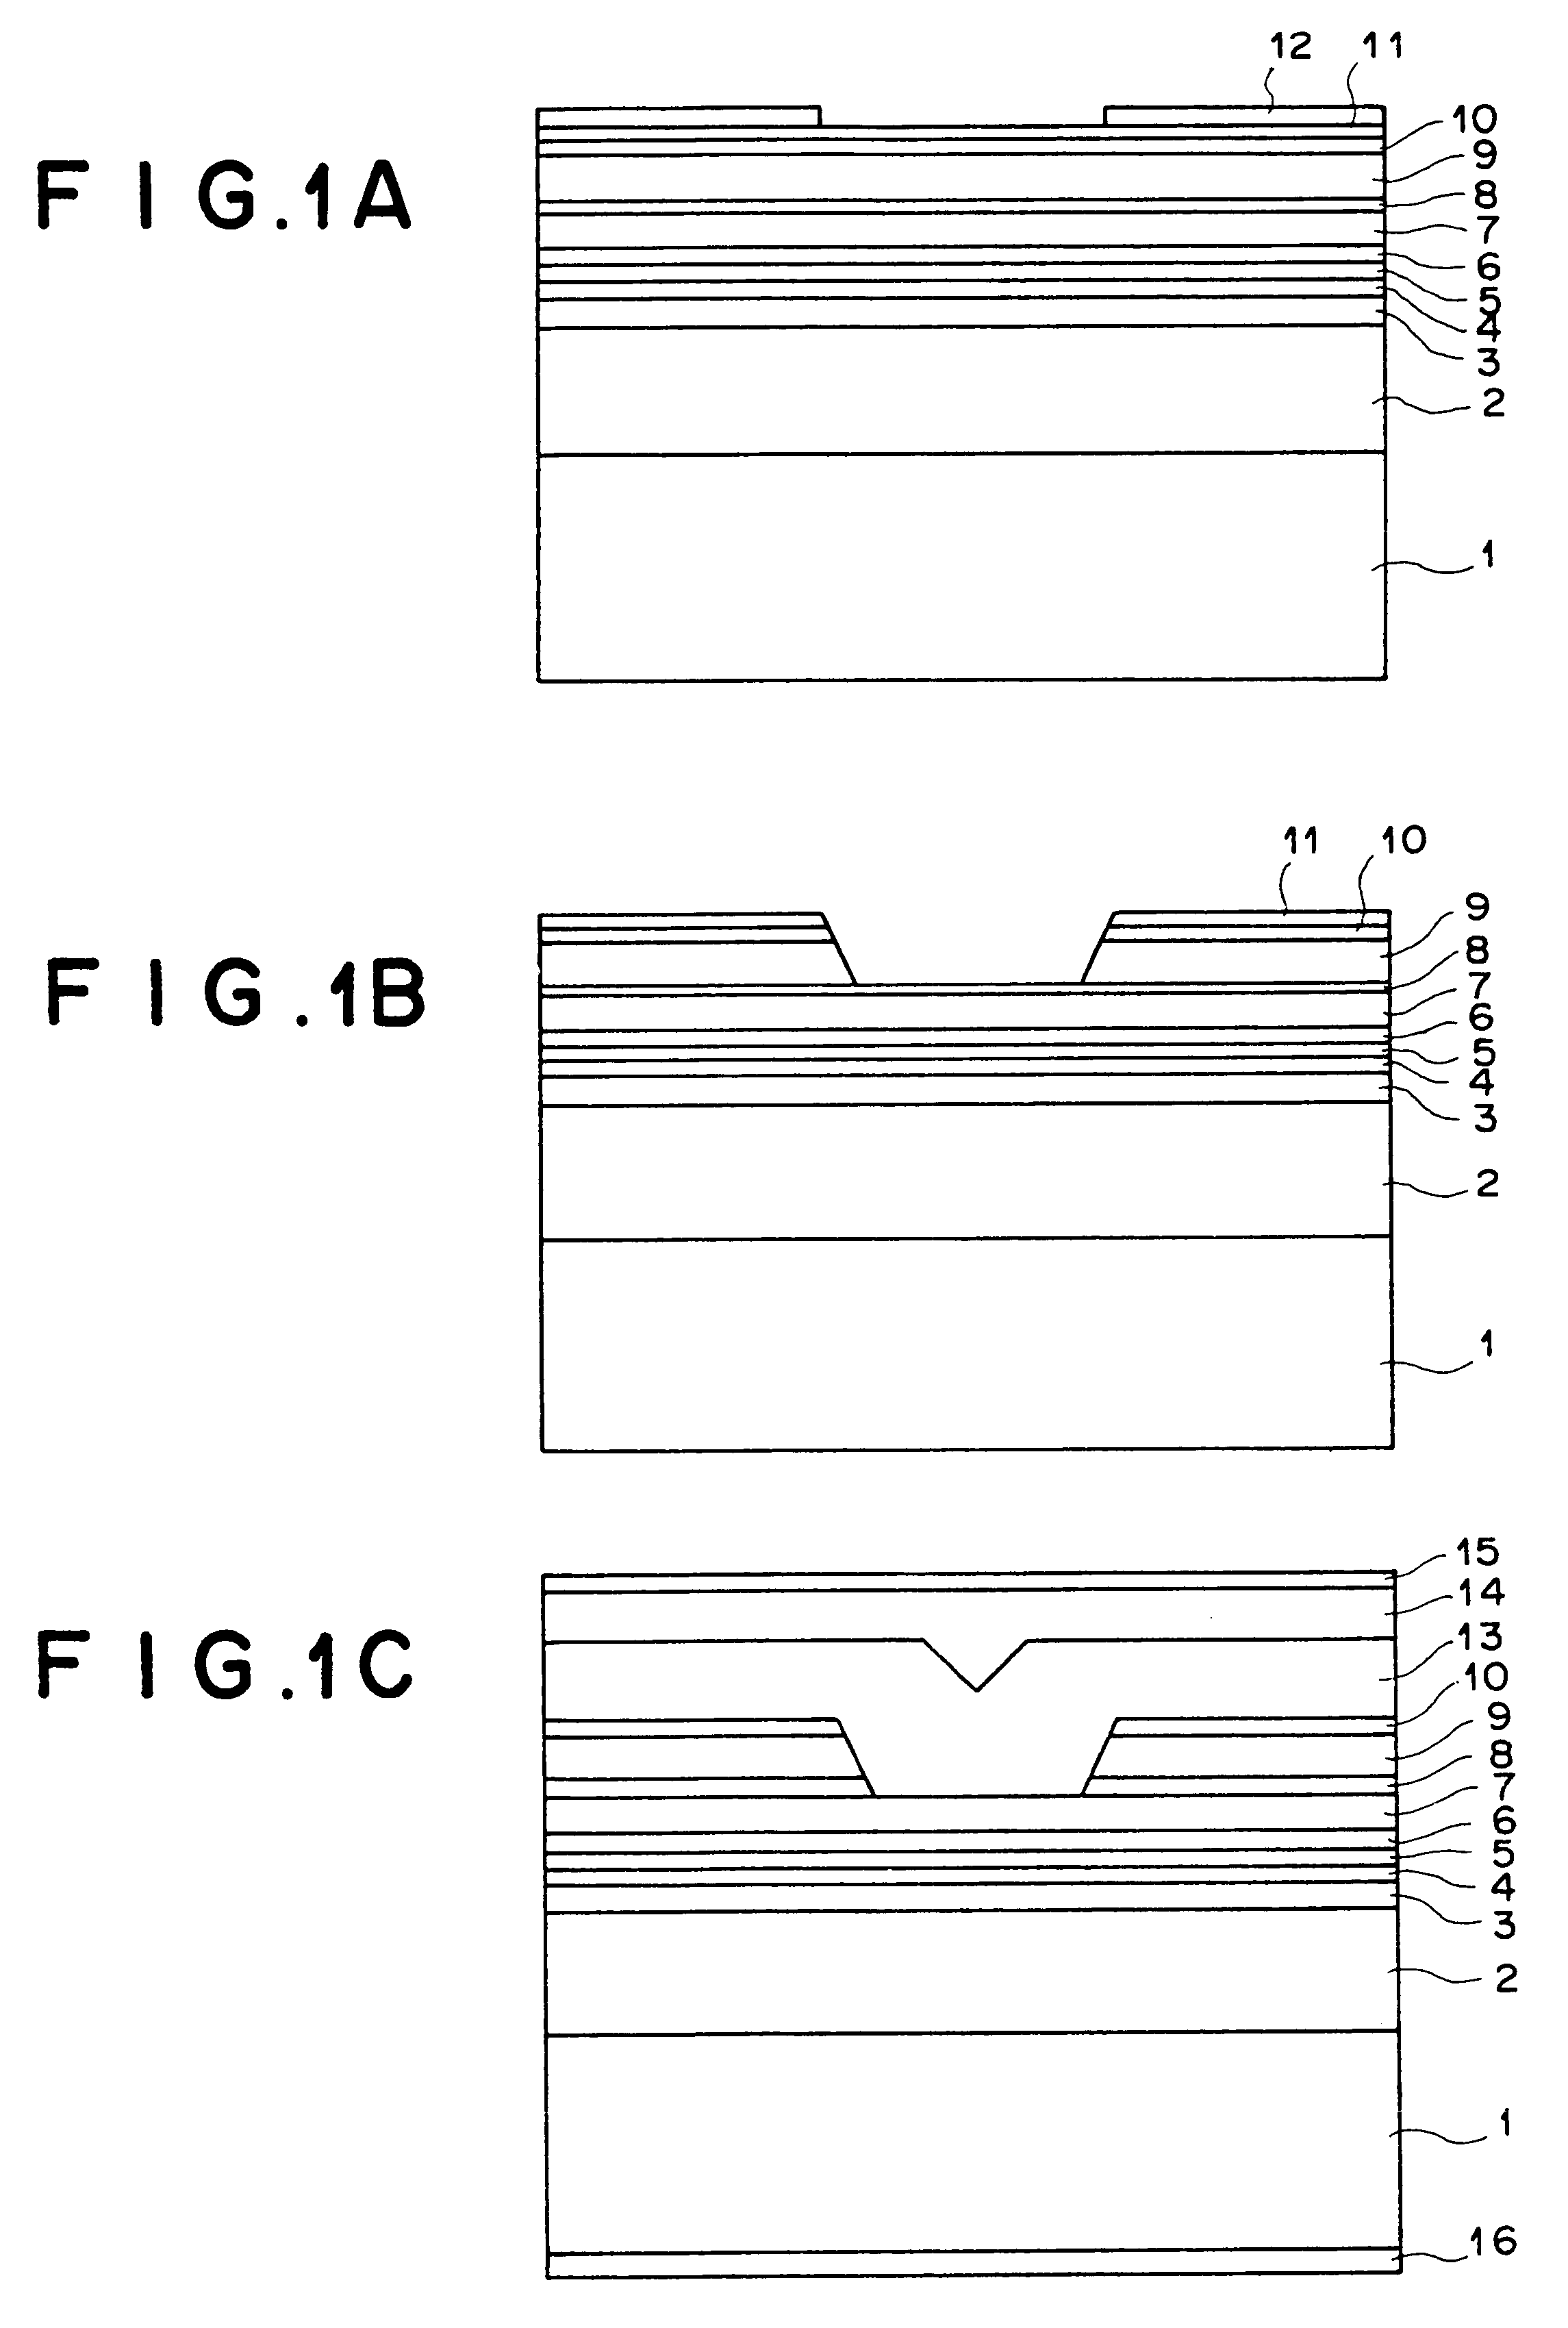 Semiconductor laser device having InGaAs compressive-strain active layer, GaAsP tensile-strain barrier layers, and InGaP optical waveguide layers